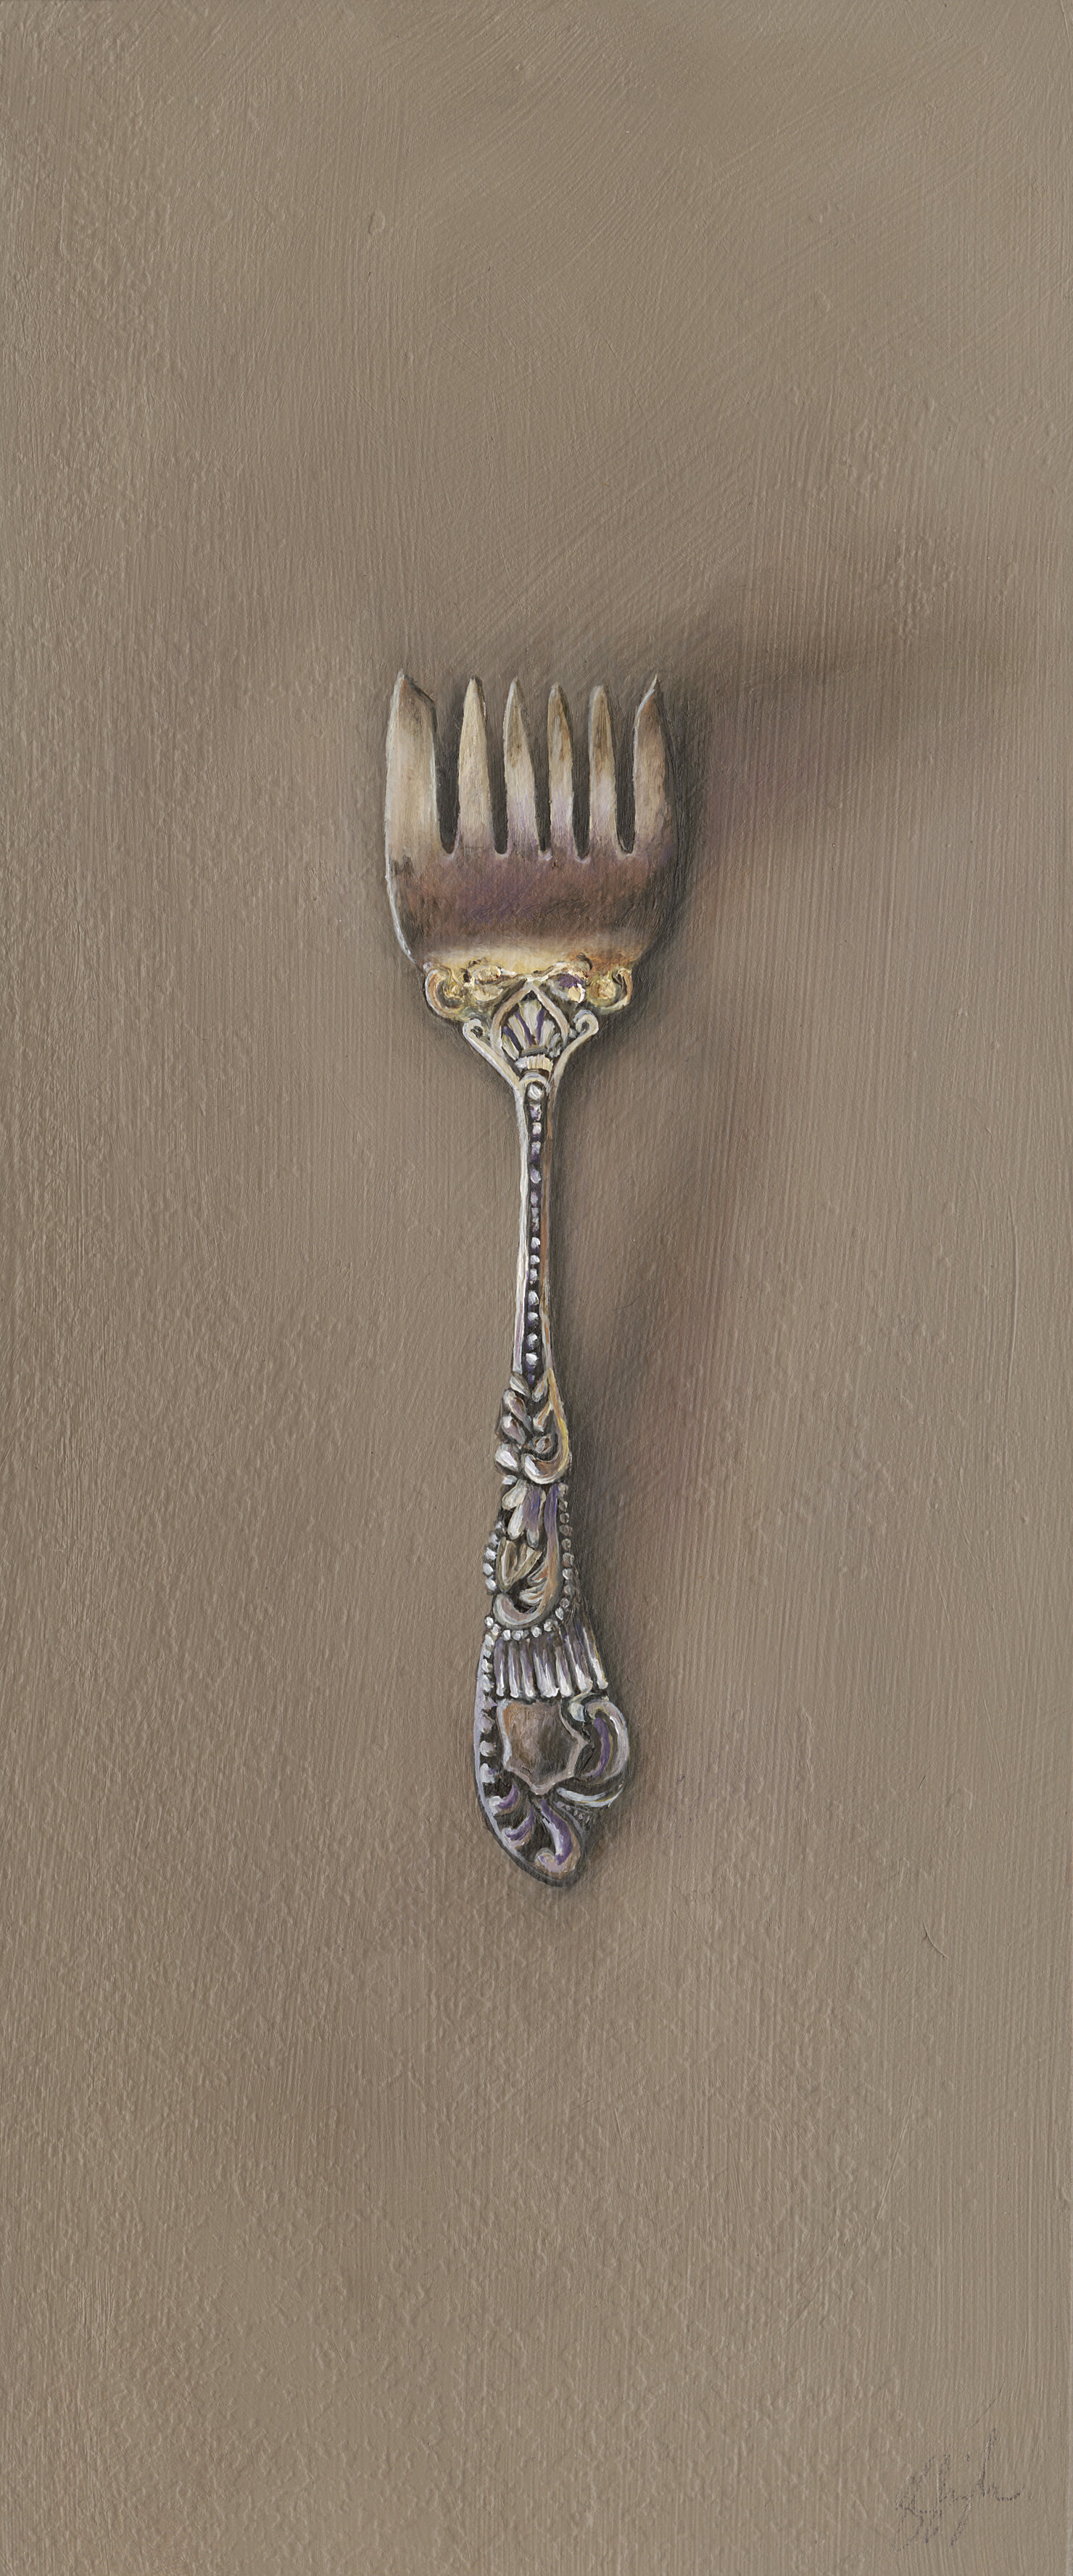   Silver Fork #19, The Expatriate  Oil on panel, 2013. 12x5” 